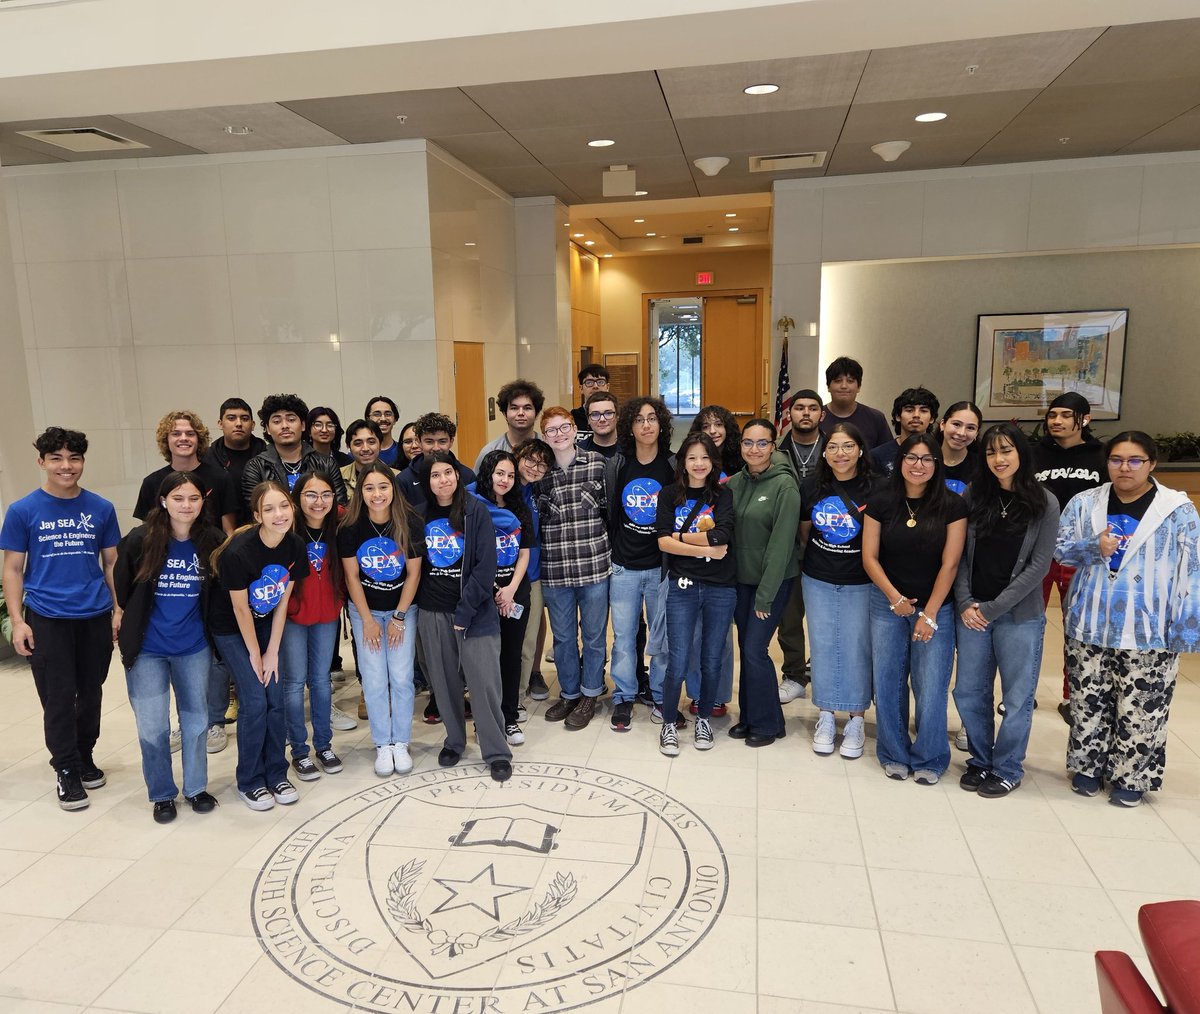 Touring @UTHealthSA with Biomedical Science students from @NISDJaySEA. We're learning about all of the programs offered and getting a taste of being a graduate /medical student. @NISD_CTE @NISD @WeGoPublic